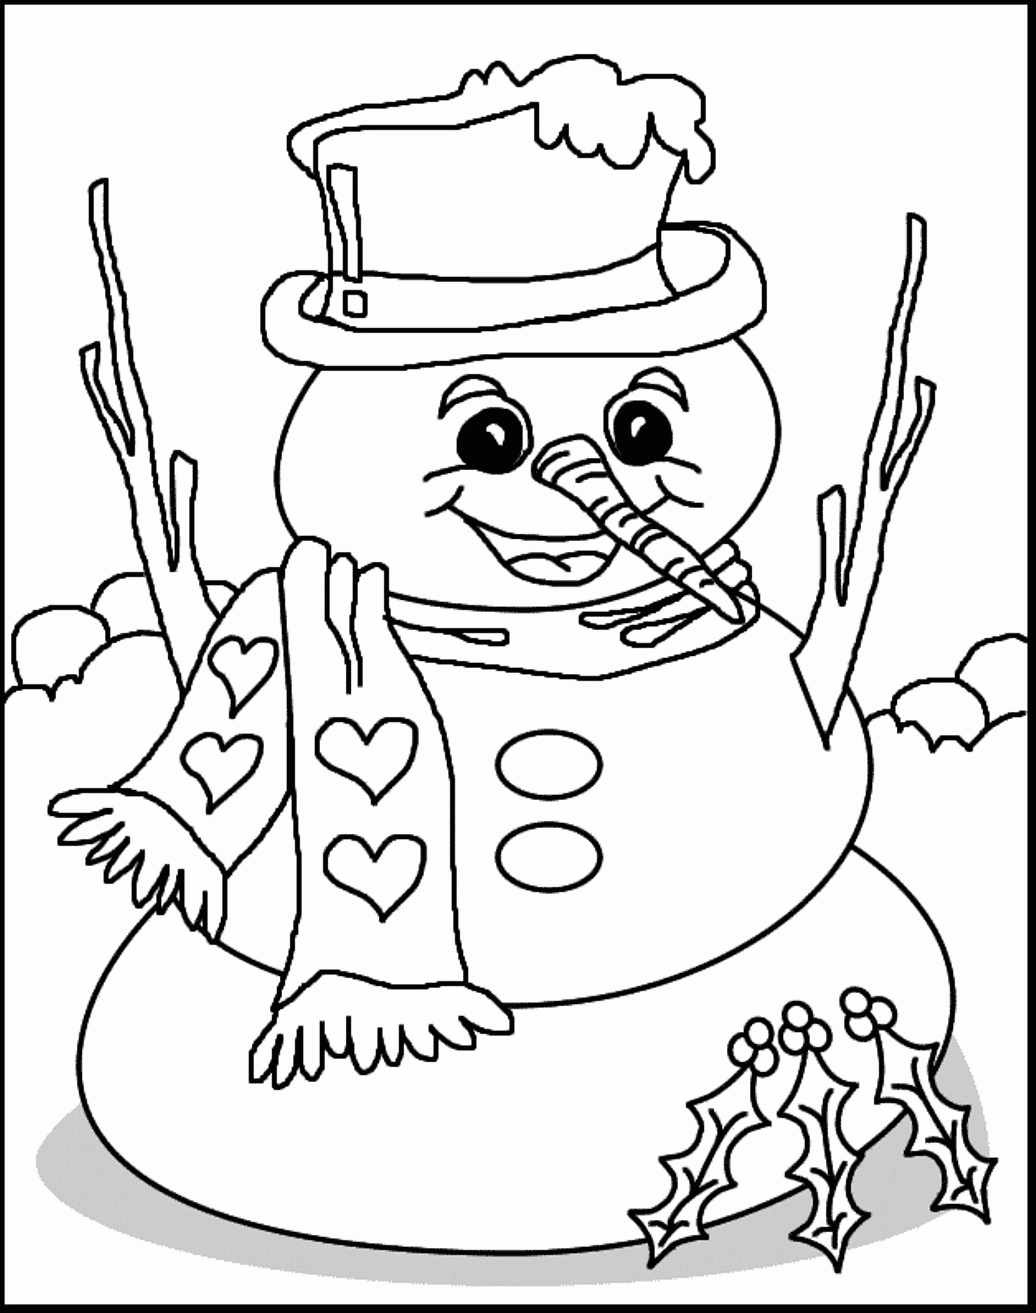 Winter Sports Coloring Pages Free Printable Coloring Sheets Winter - Free Printable Winter Coloring Pages